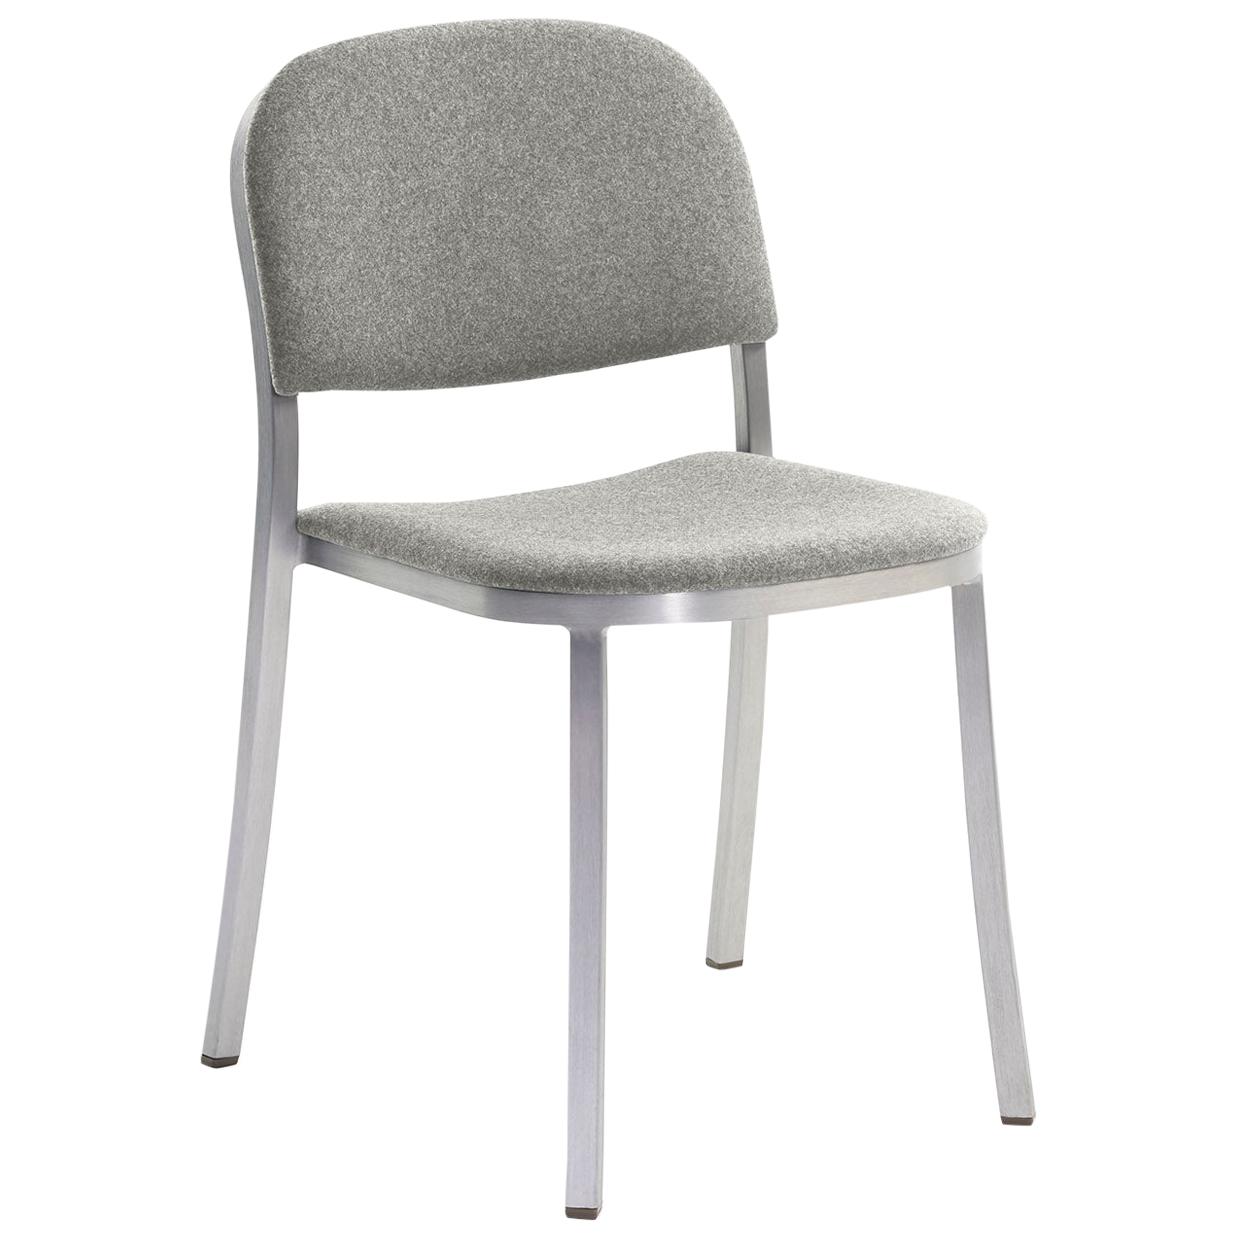 Emeco 1 Inch Stacking Chair with Grey Fabric & Aluminum Legs by Jasper Morrison For Sale